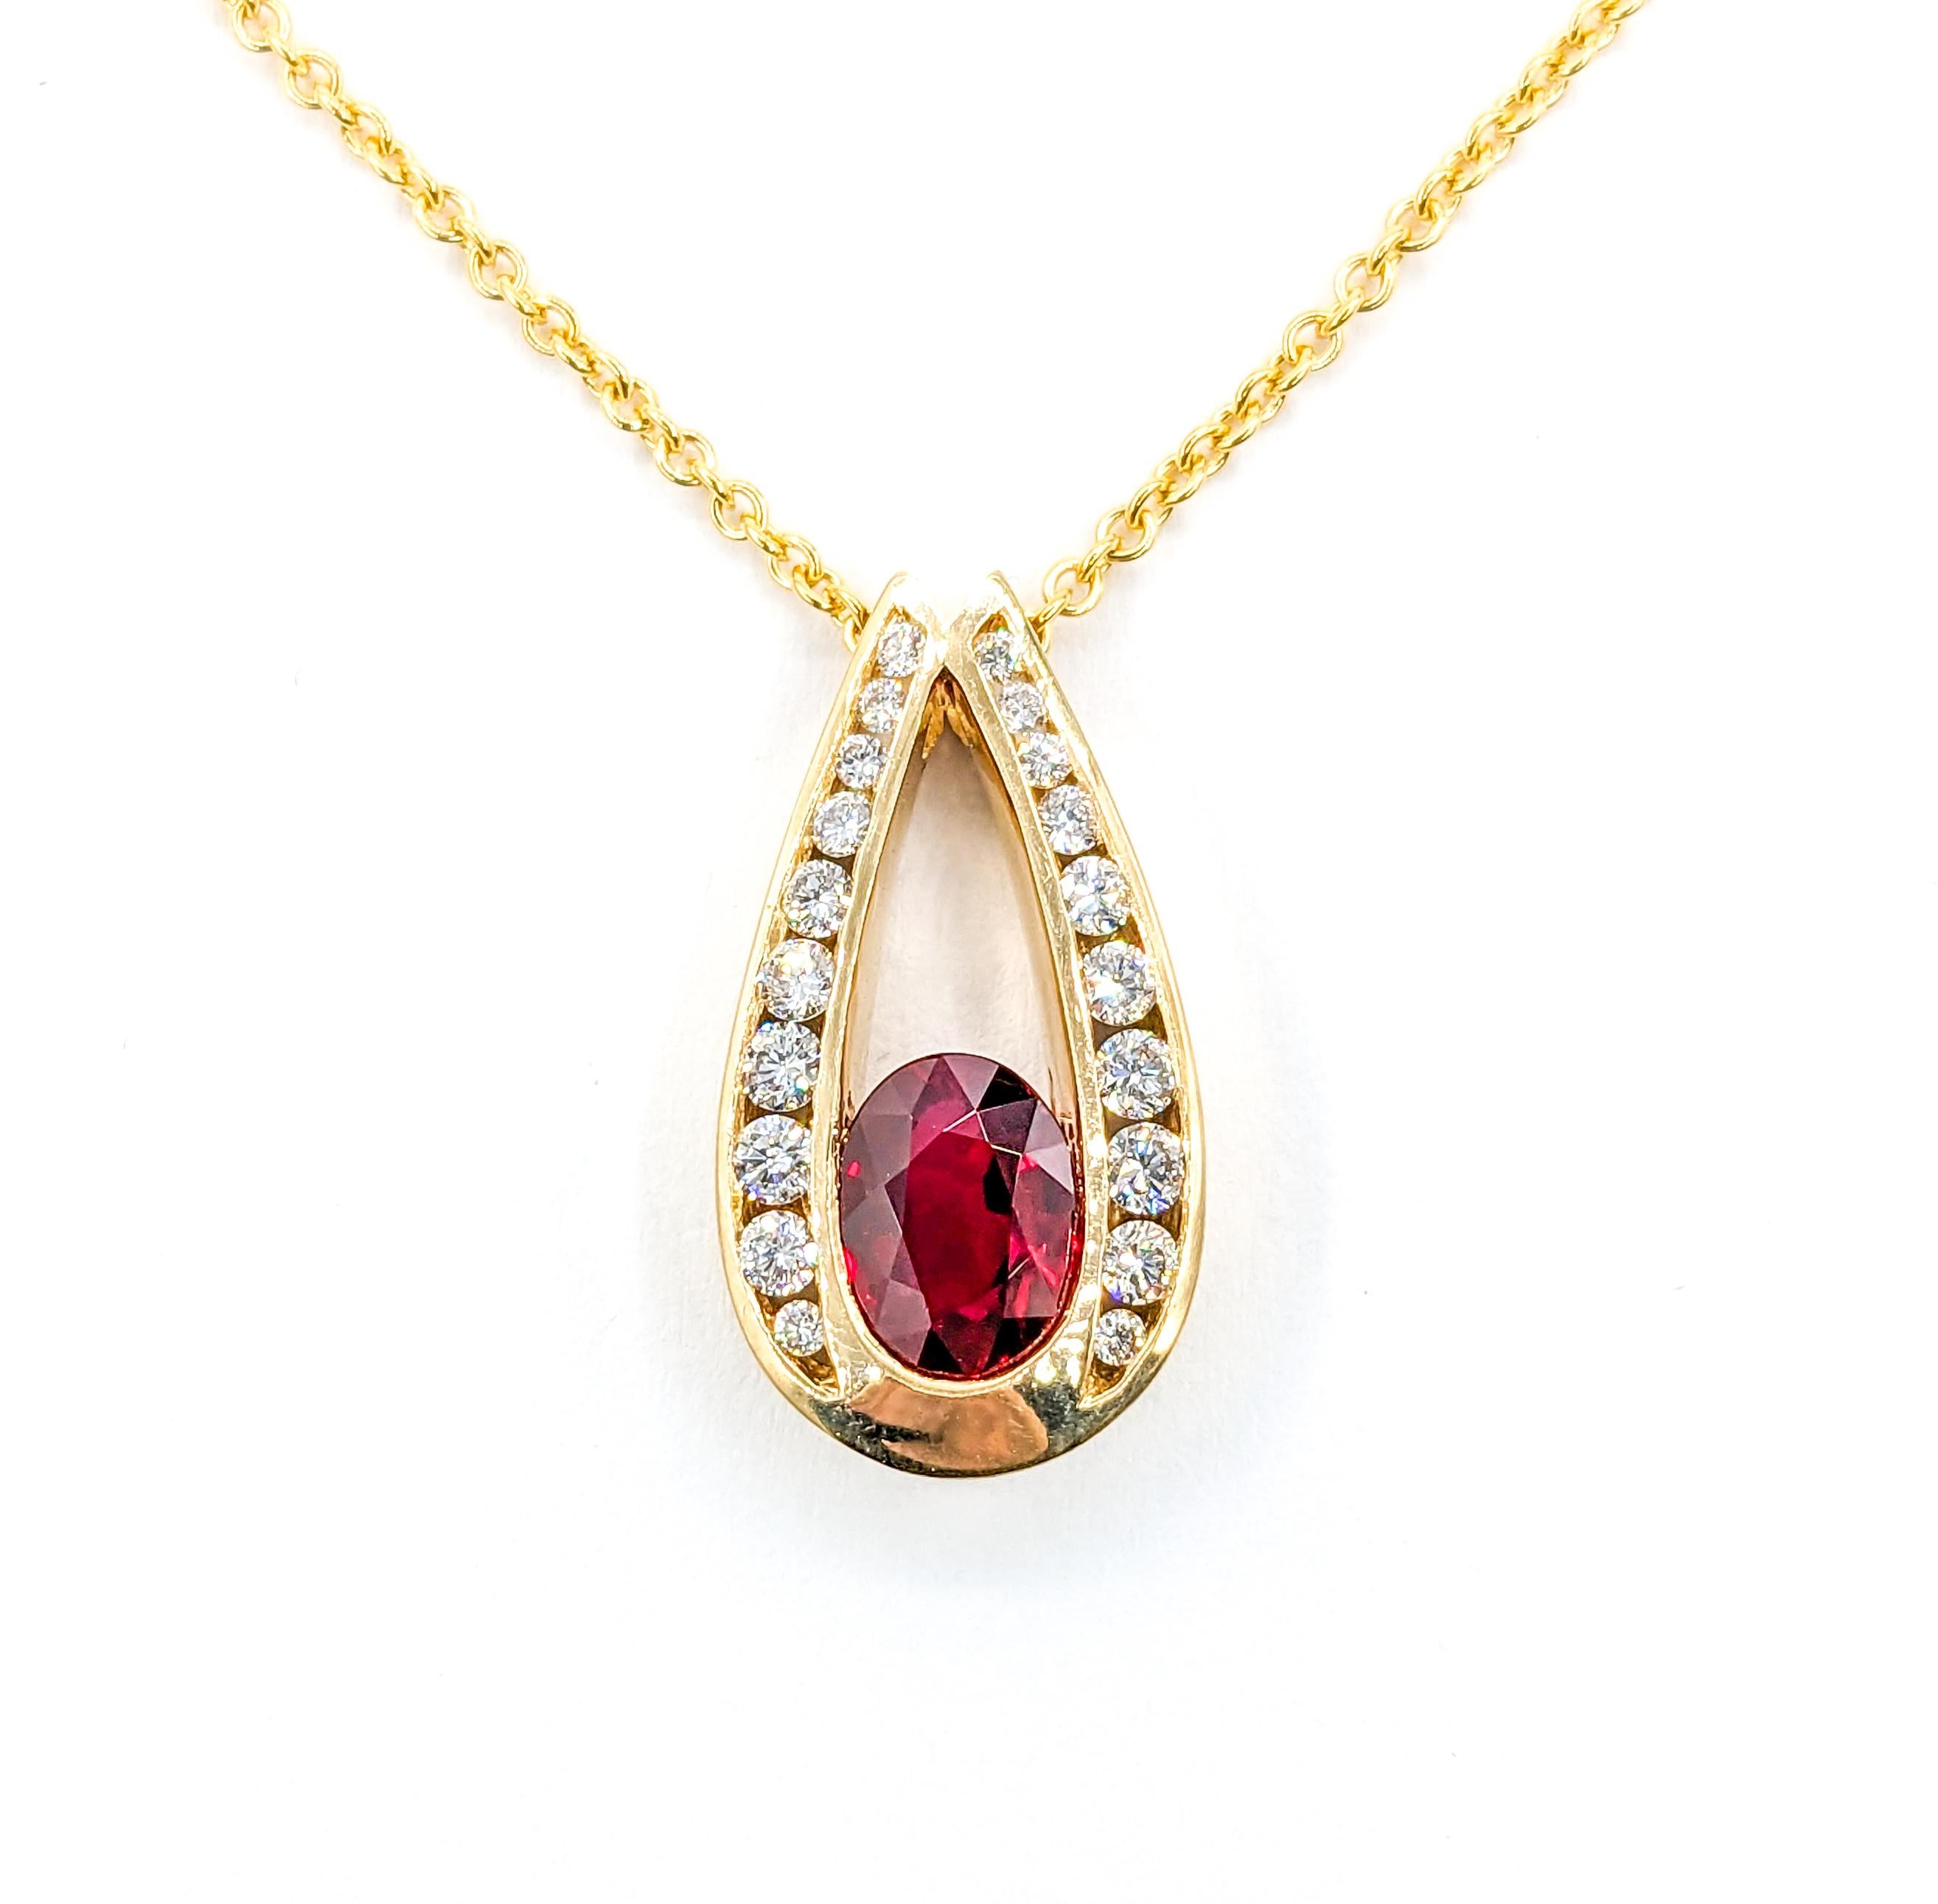 Contemporary GIA 1.84ct Pigeons Blood Natural Burmese Ruby & Diamond Pendant With Chain For Sale